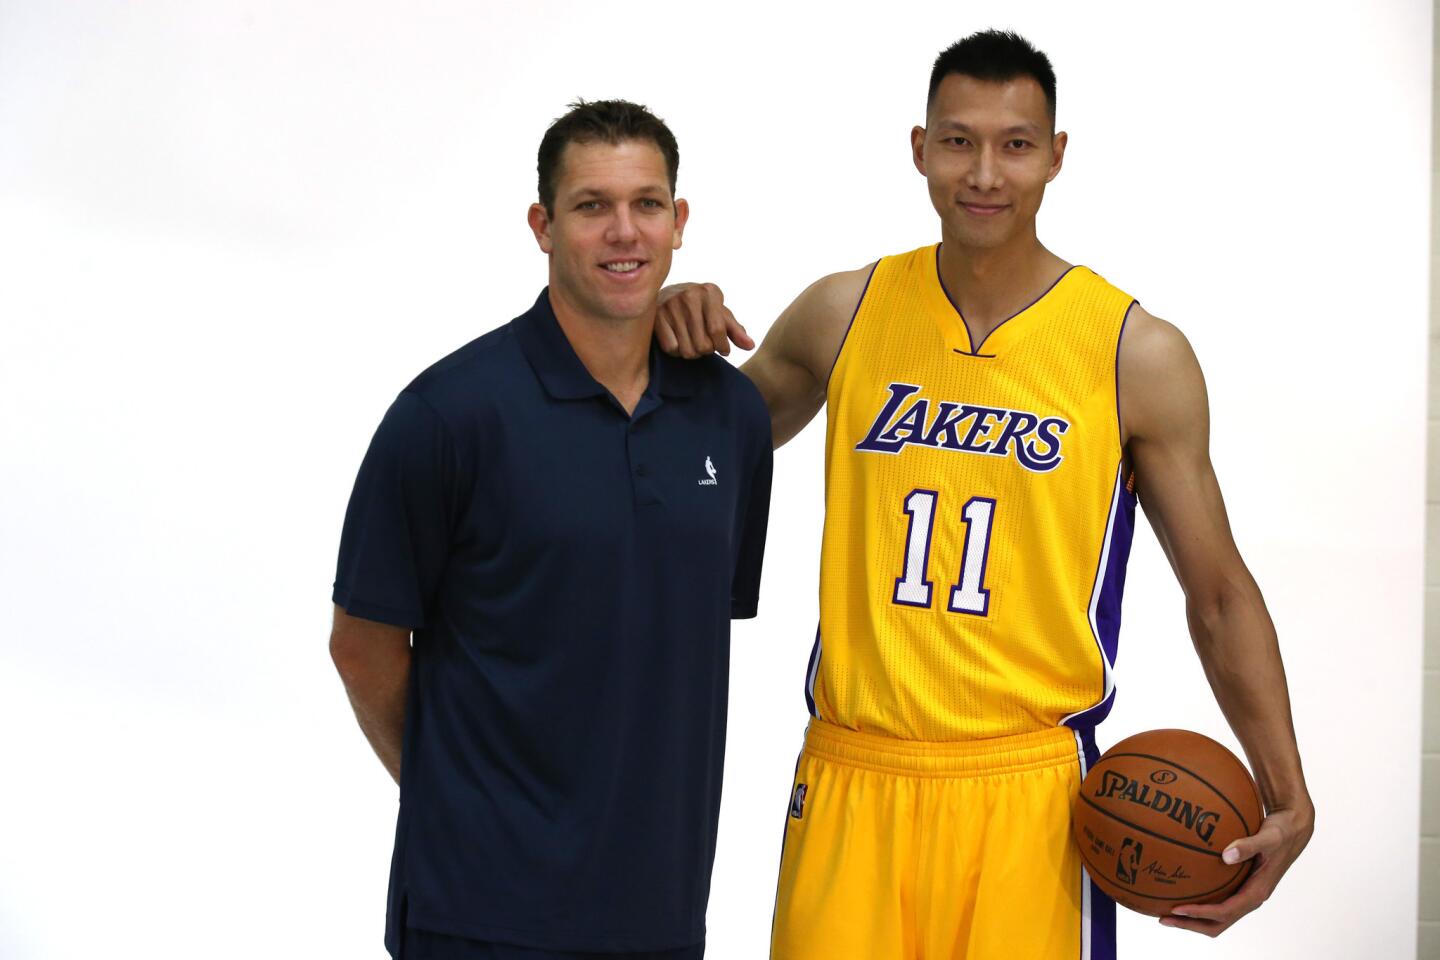 Lakers Coach Luke Walton and center Yi Jianlian pose for pictures during the team's media day.